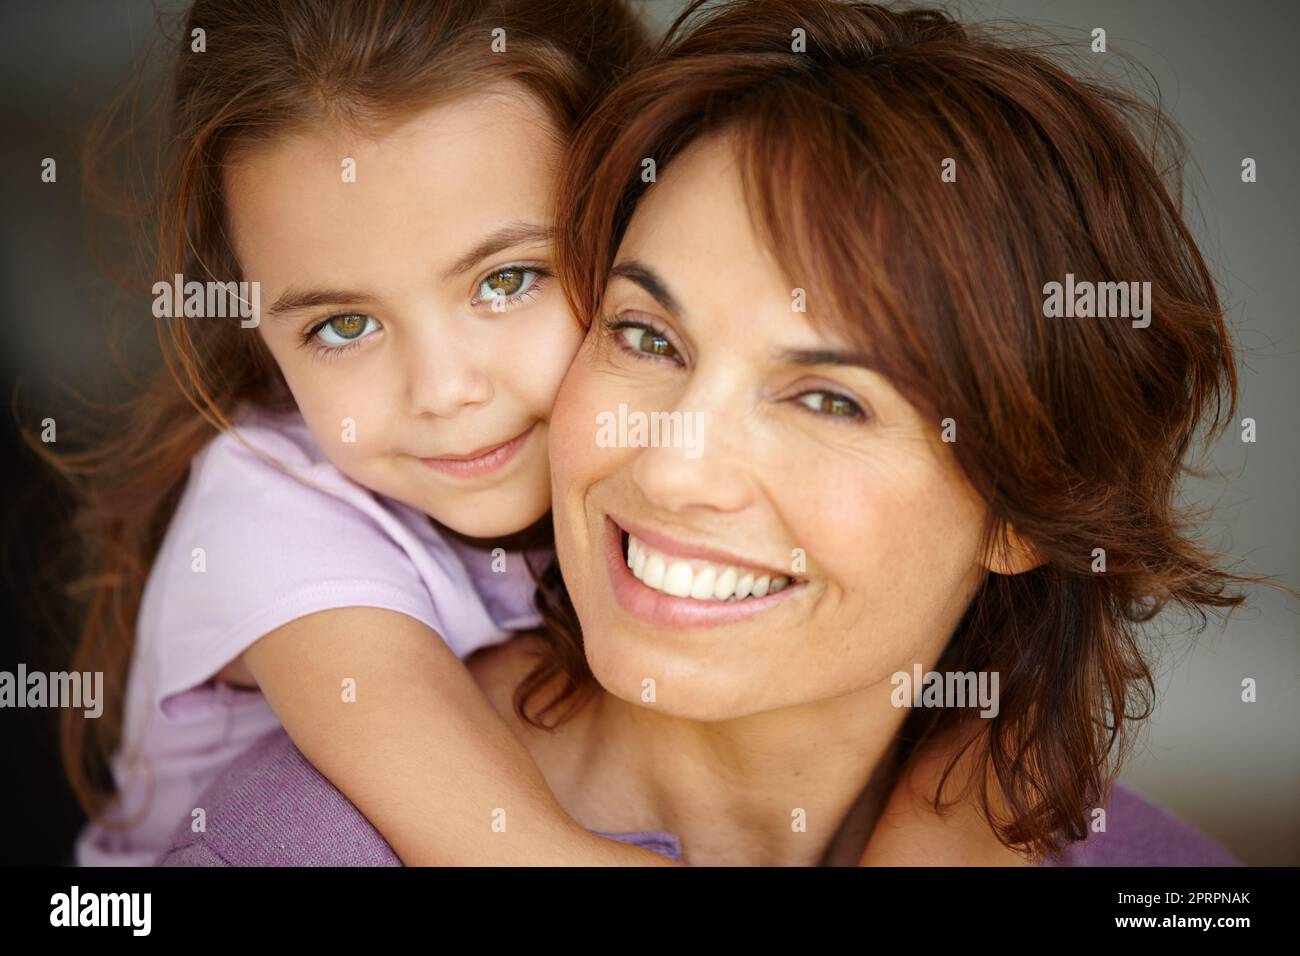 My daughter, my life. Portrait of a mother spending time with her adorable little girl. Stock Photo